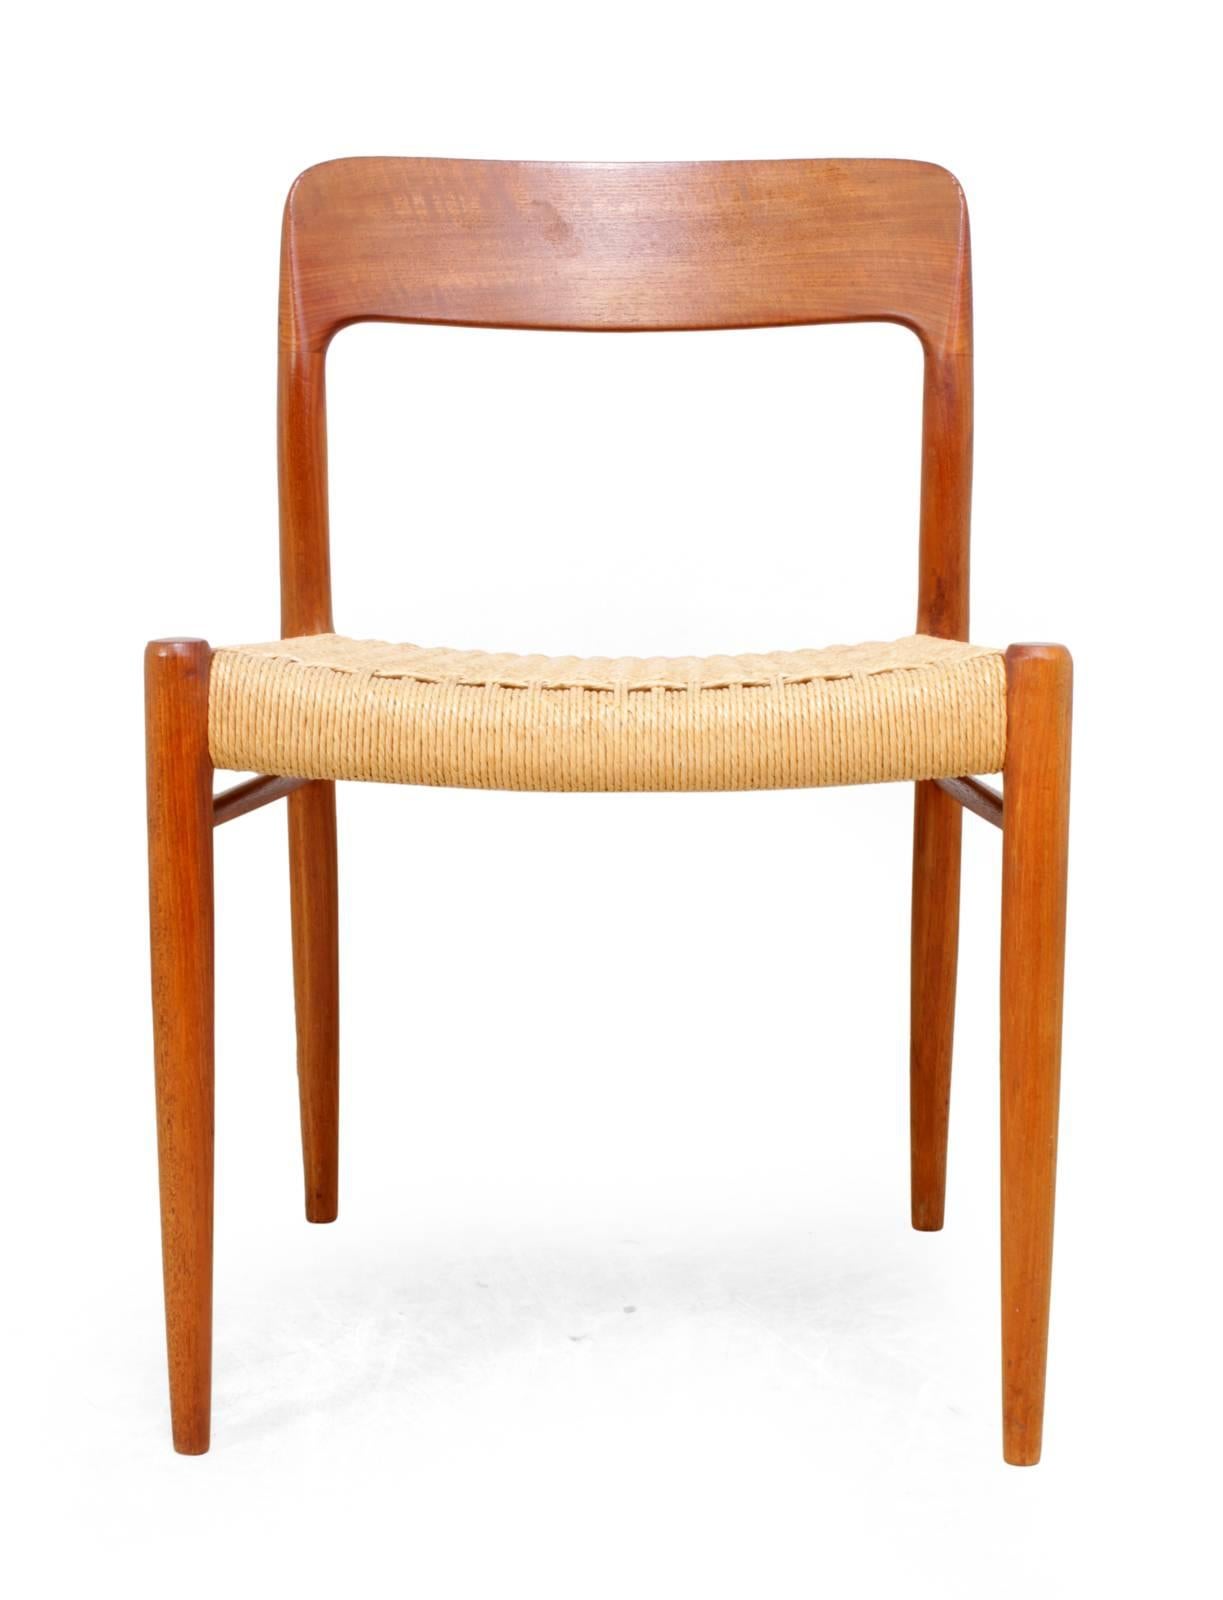 Danish Model 75 Dining Chairs in Teak by J L Moller